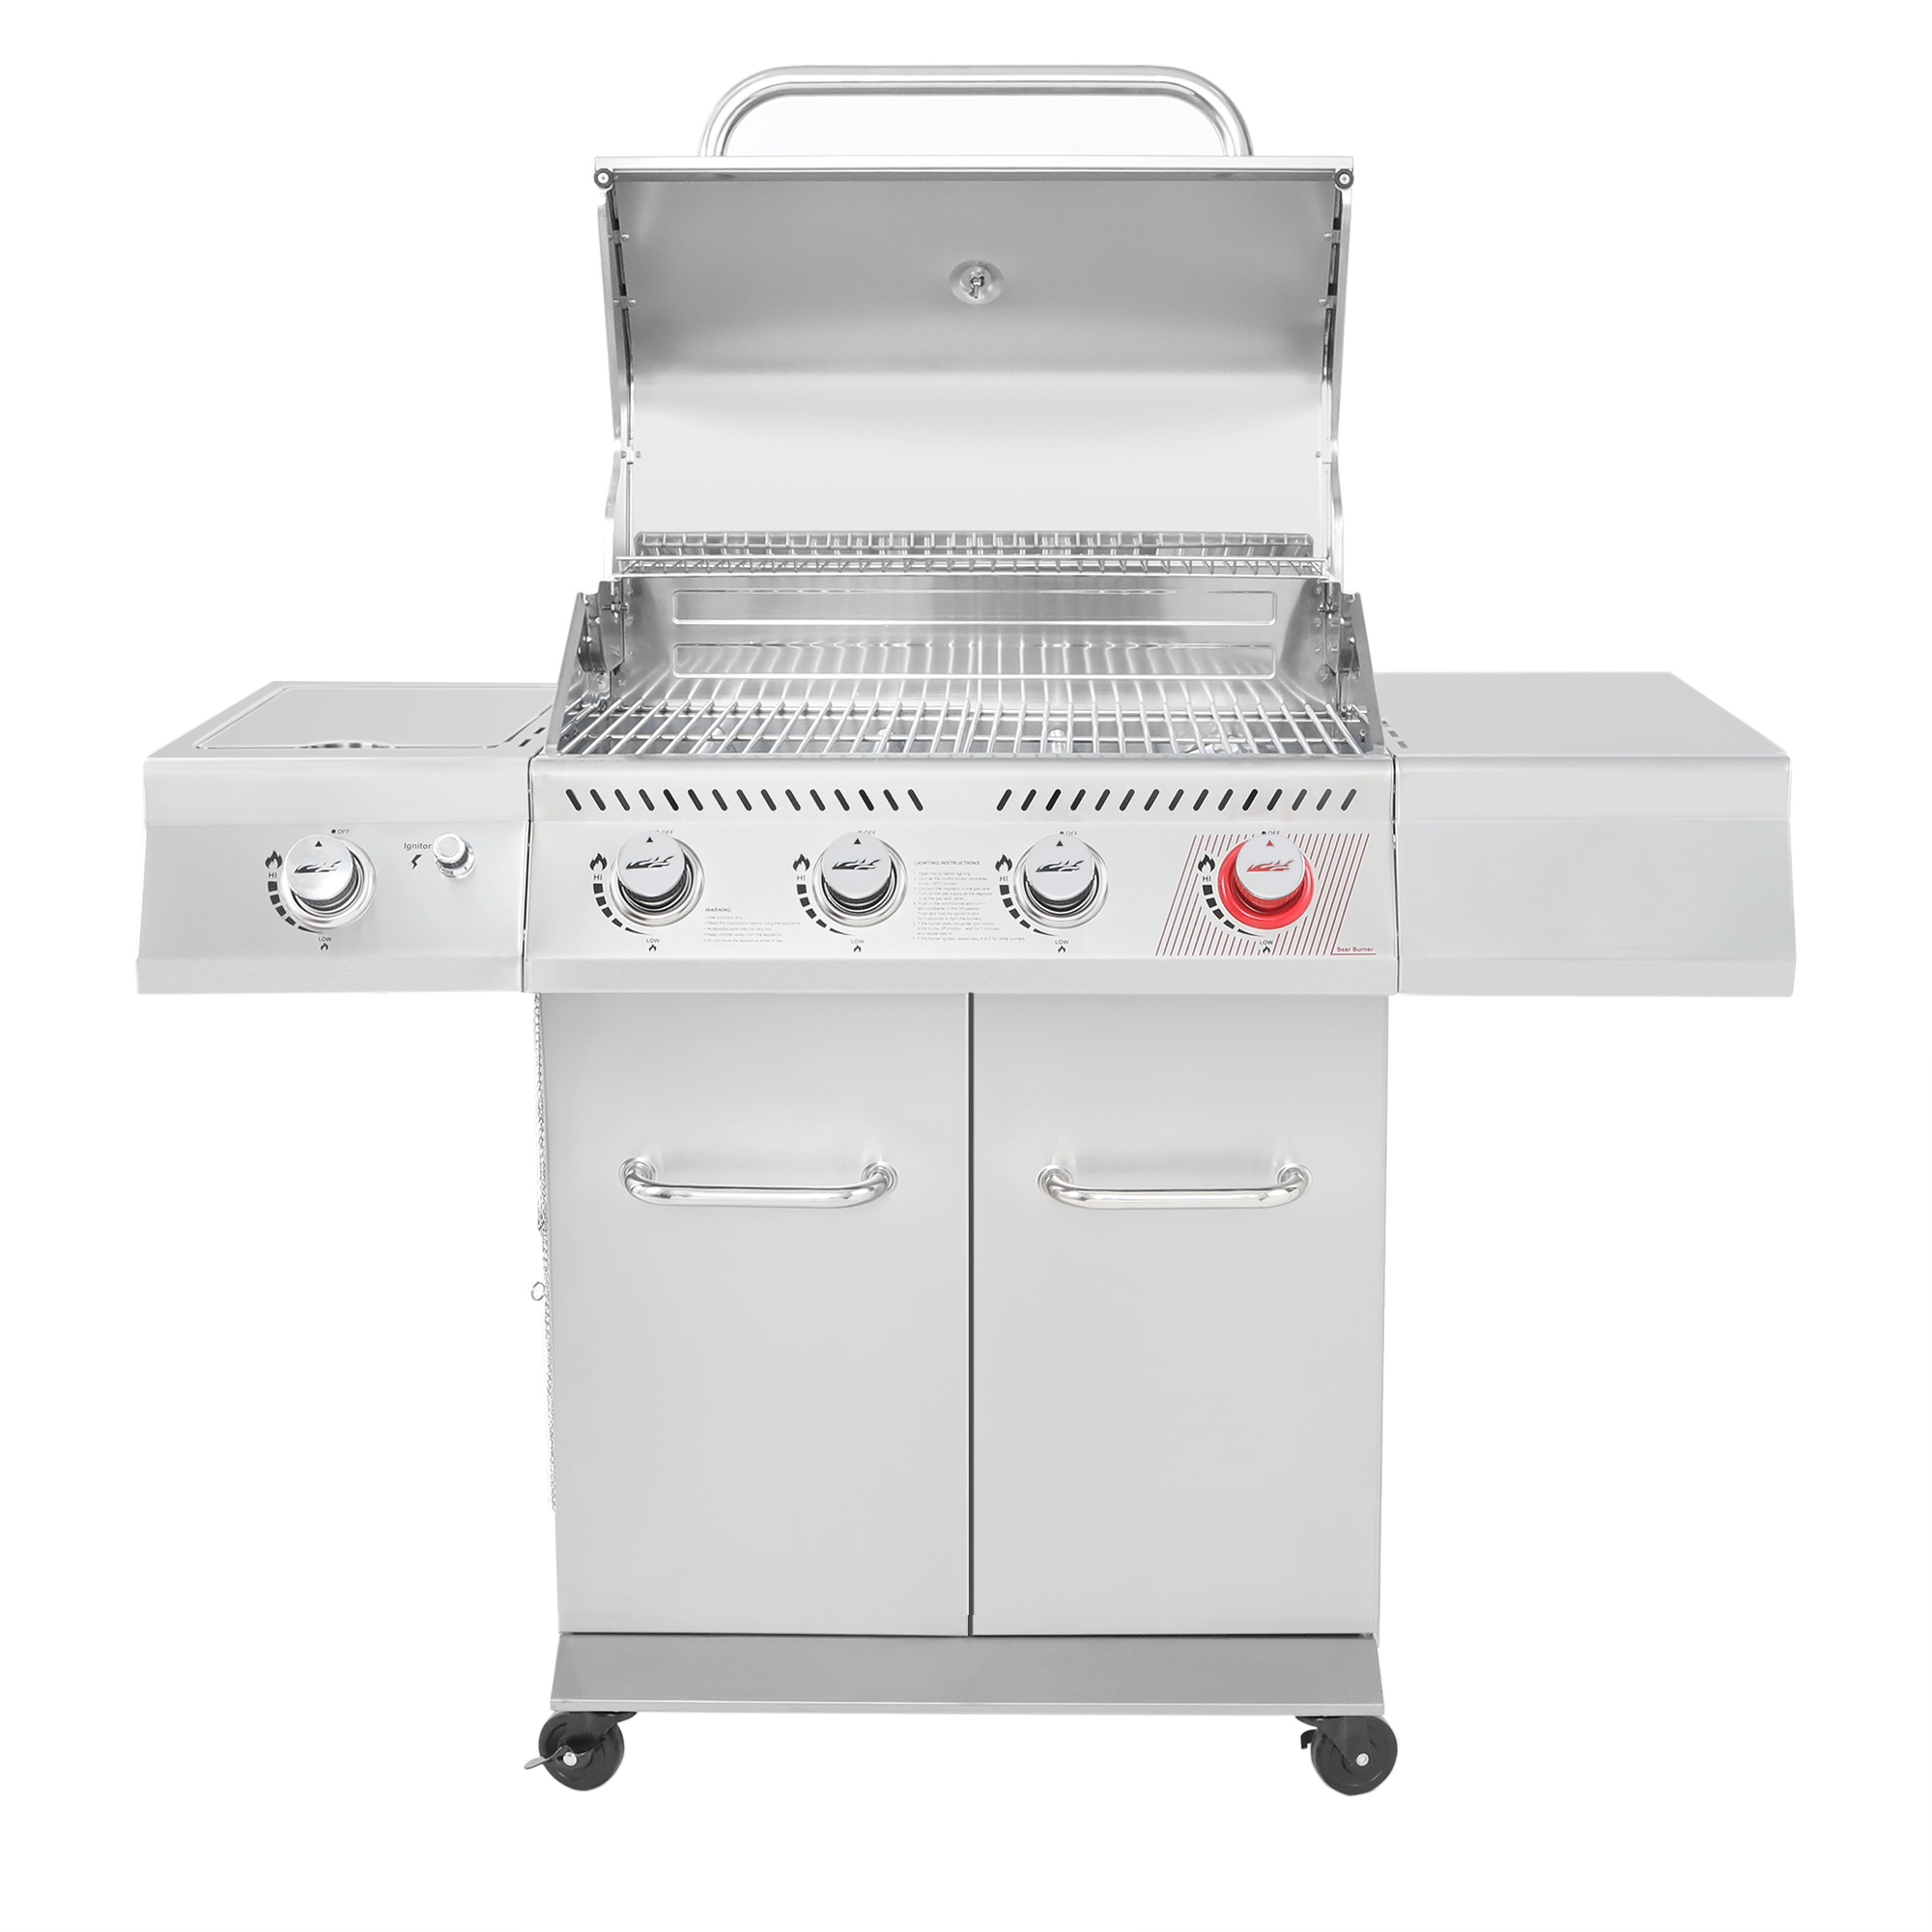 Royal Gourmet GA4402S Stainless Steel 4-Burner BBQ Cabinet Style Gas Grill with Sear Burner and Side Burner Silver - image 5 of 11